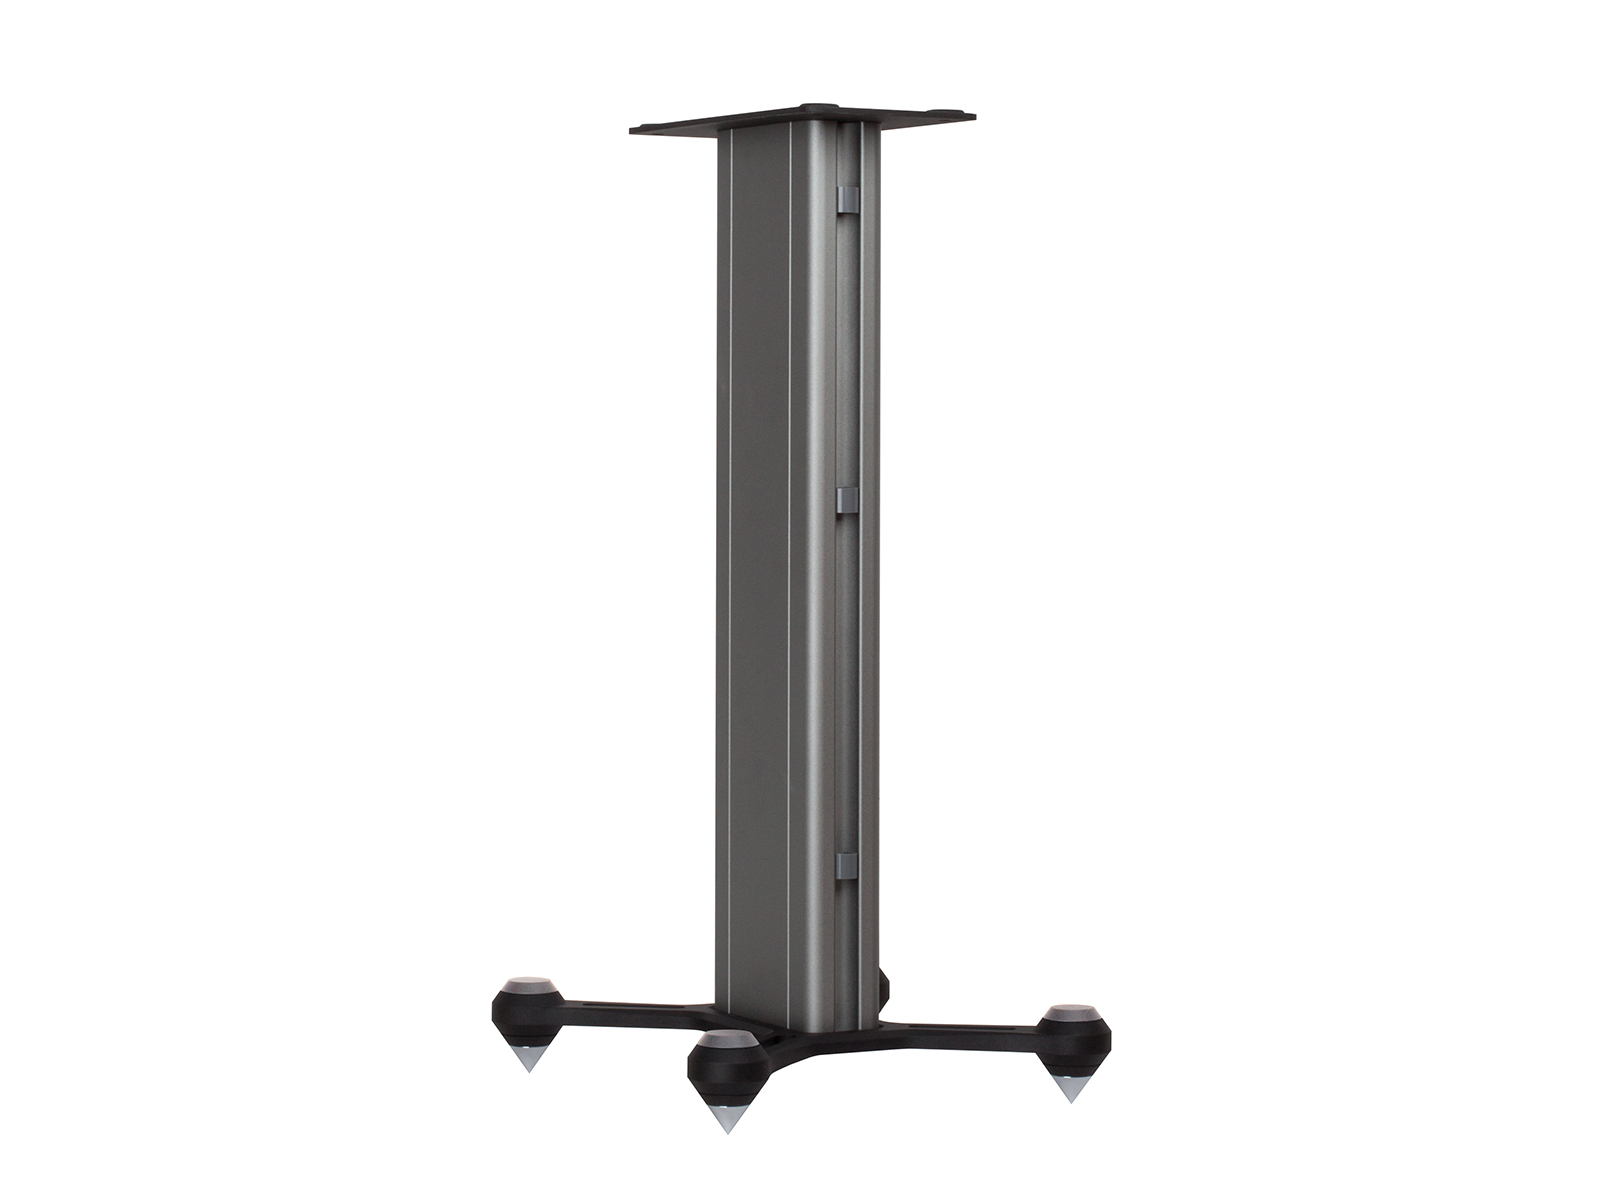 Speaker STAND, rear view in a black finish.